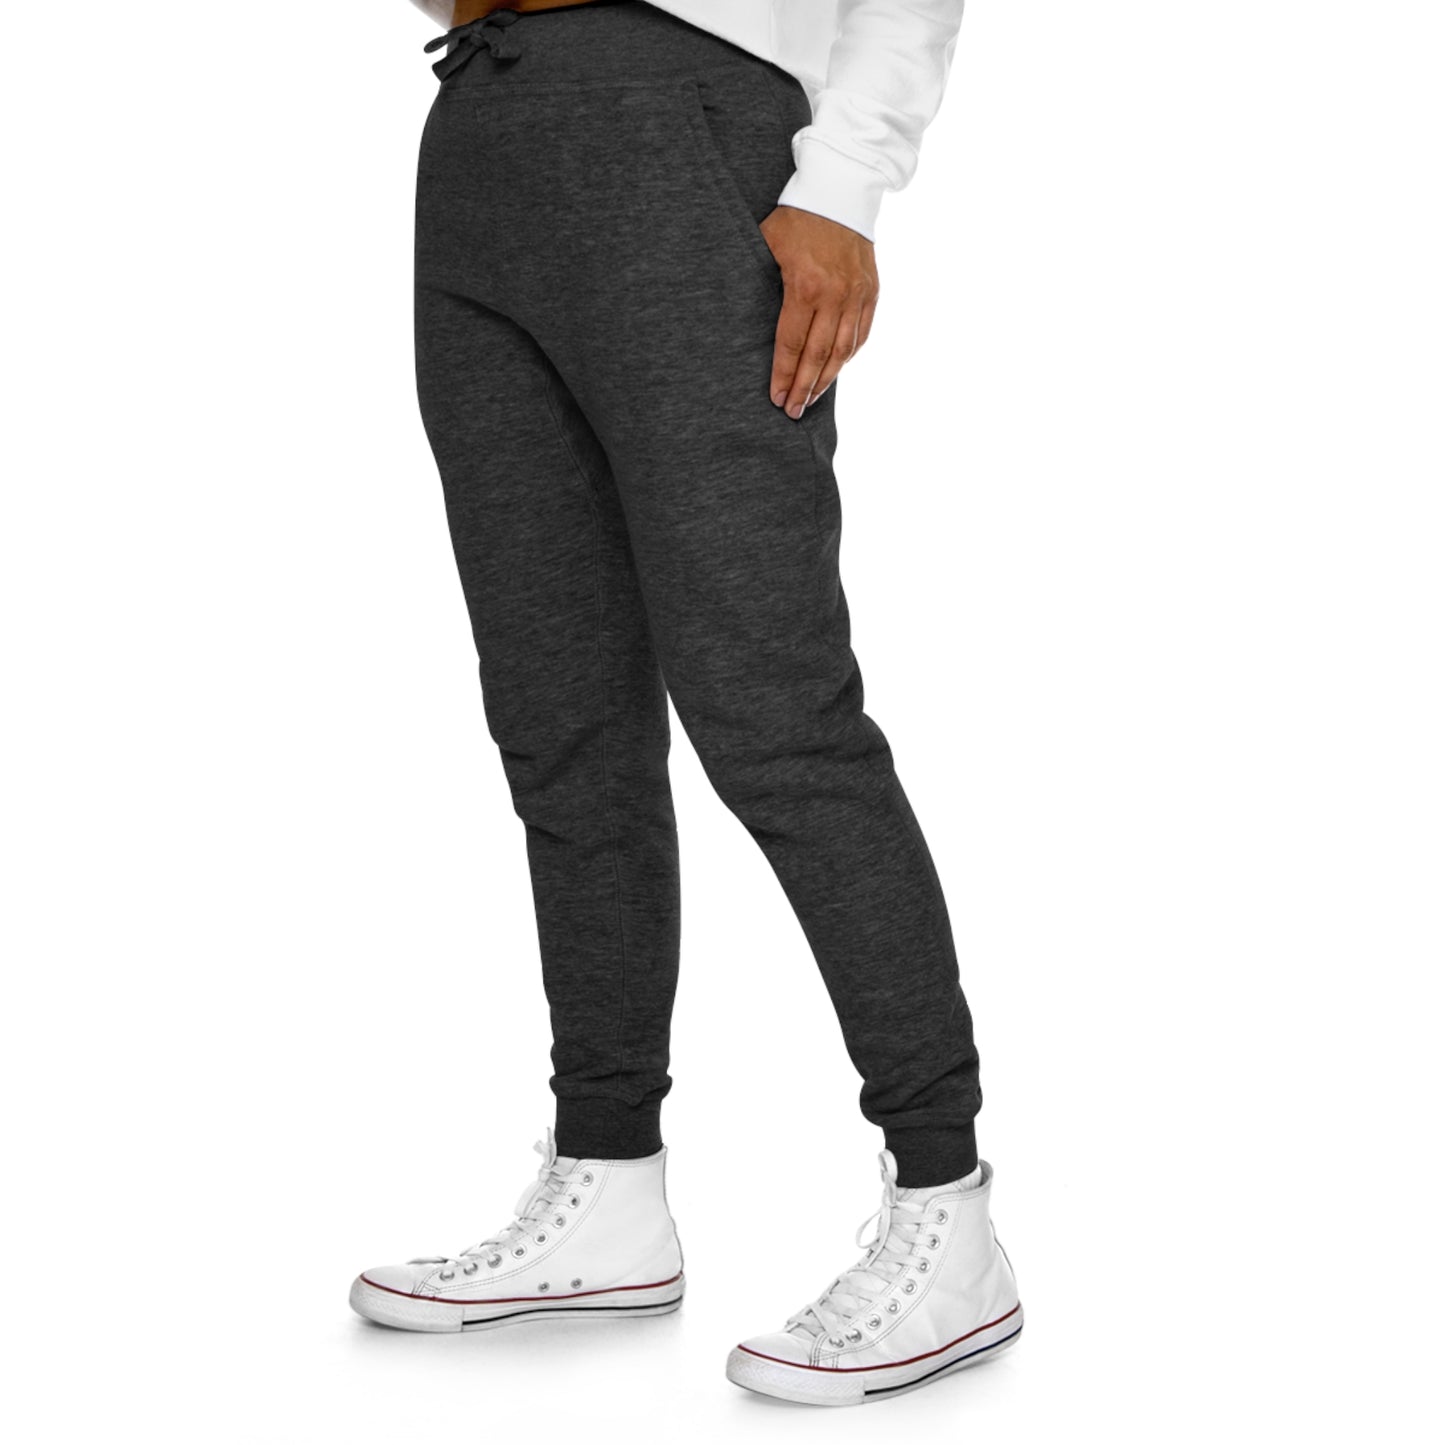 The Fall Joggers